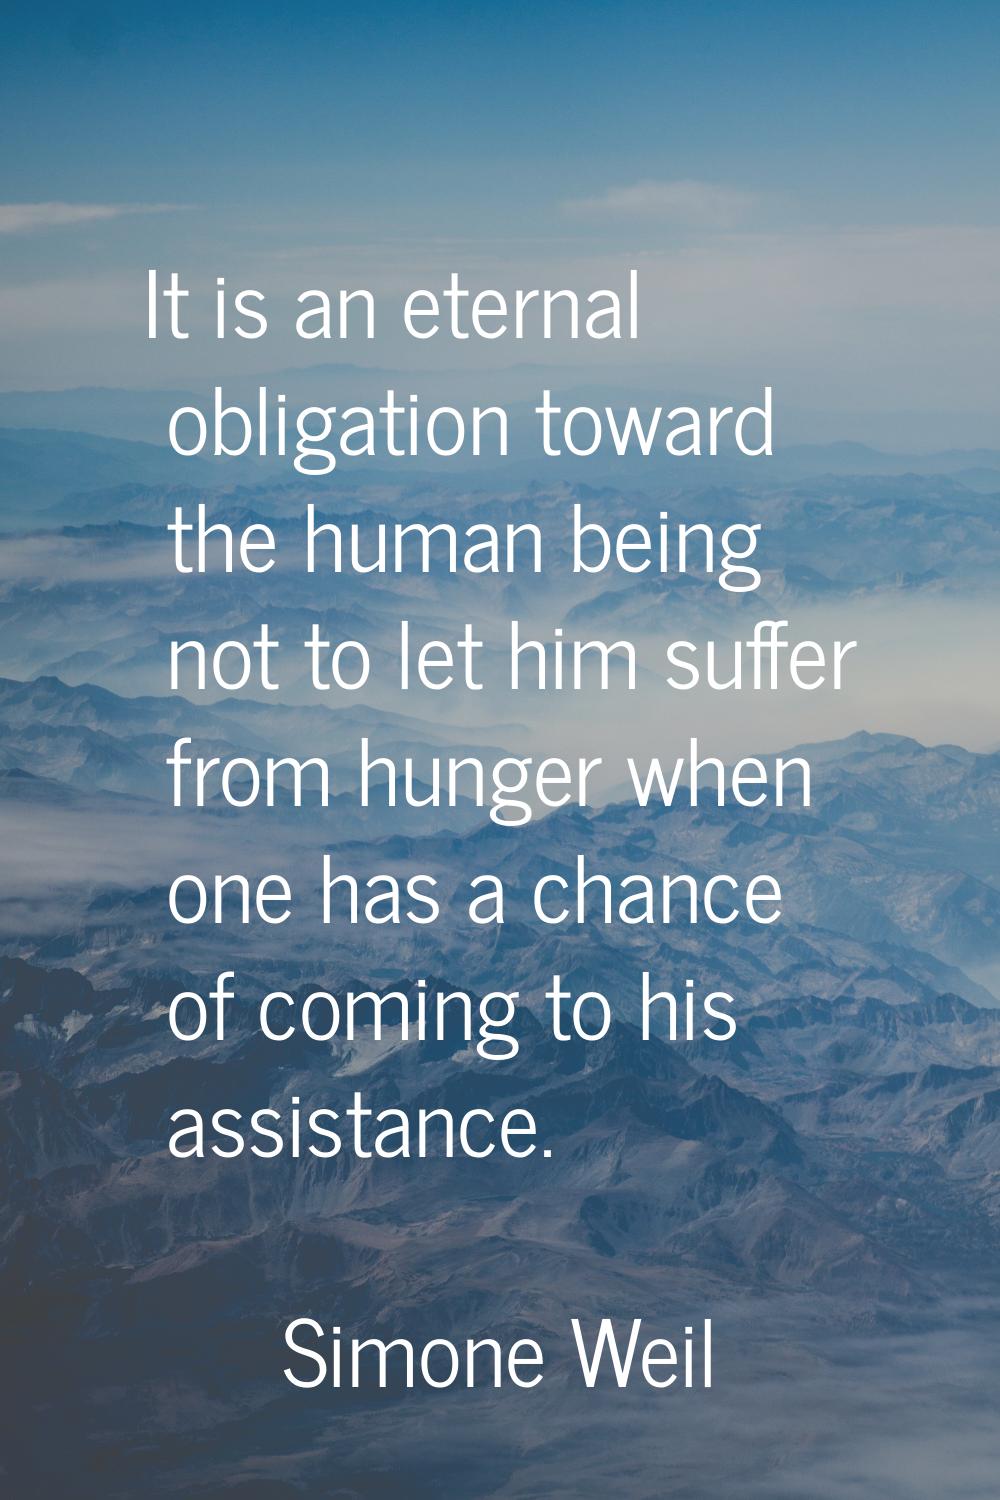 It is an eternal obligation toward the human being not to let him suffer from hunger when one has a